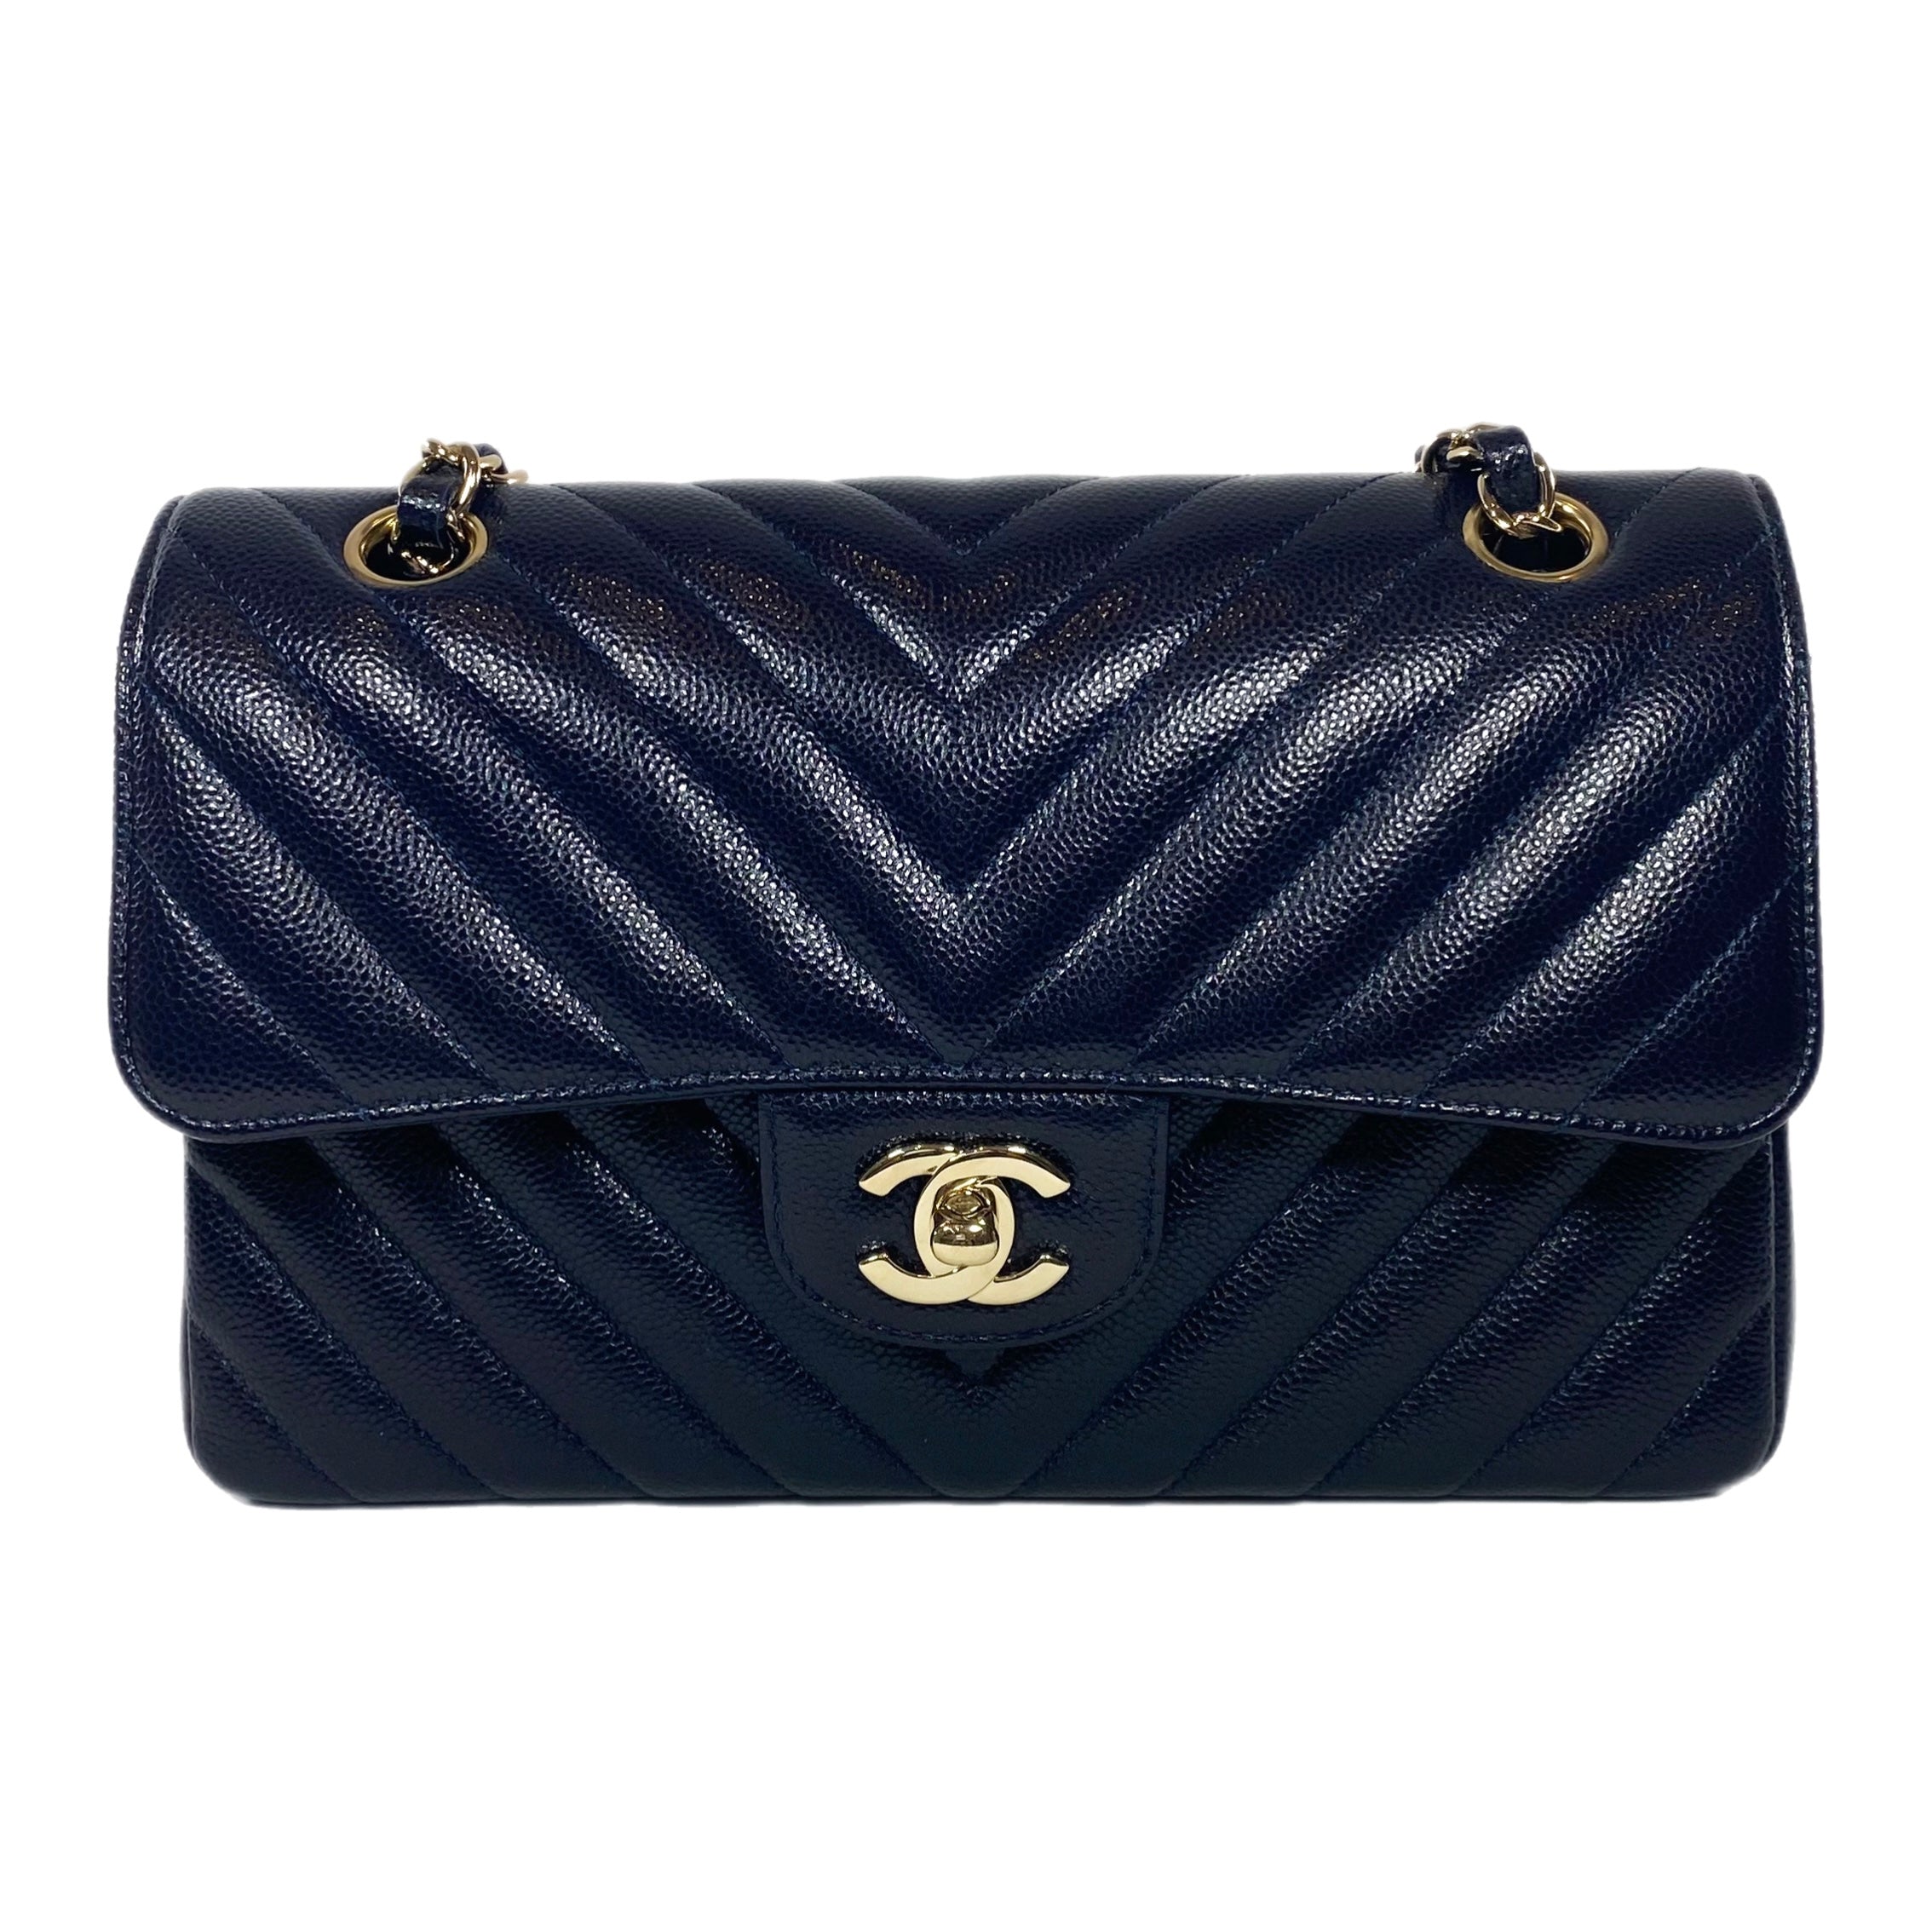 Chanel Navy Quilted Lambskin Double Flap Bag Medium Q6B0101IN0055